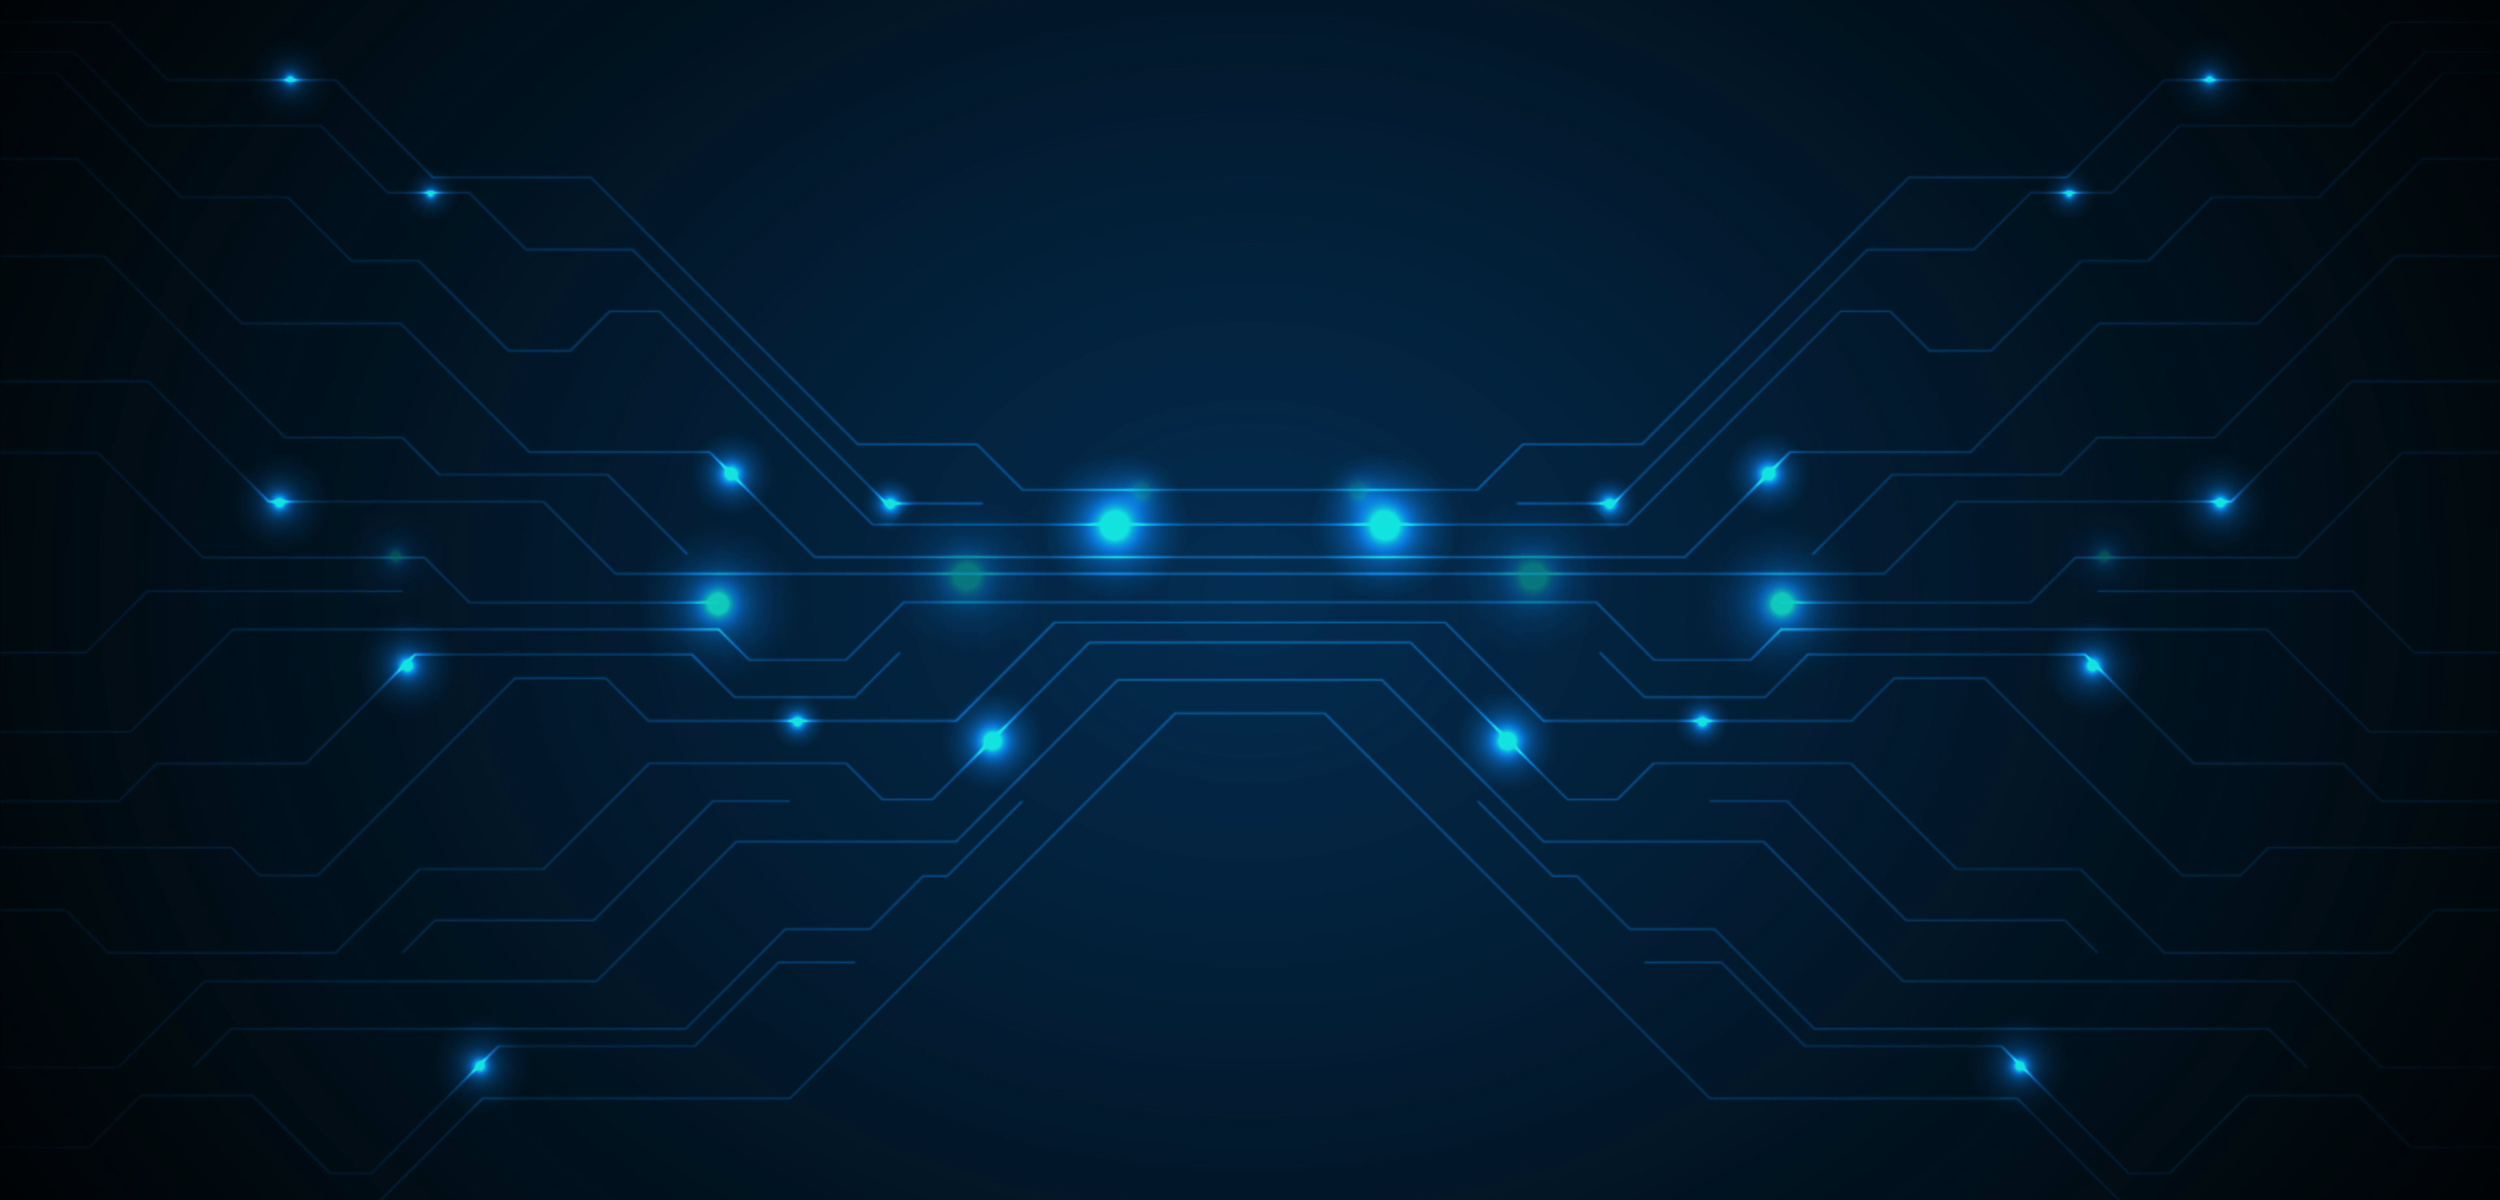 Abstract blue technology background with glowing lines and circuit patterns.